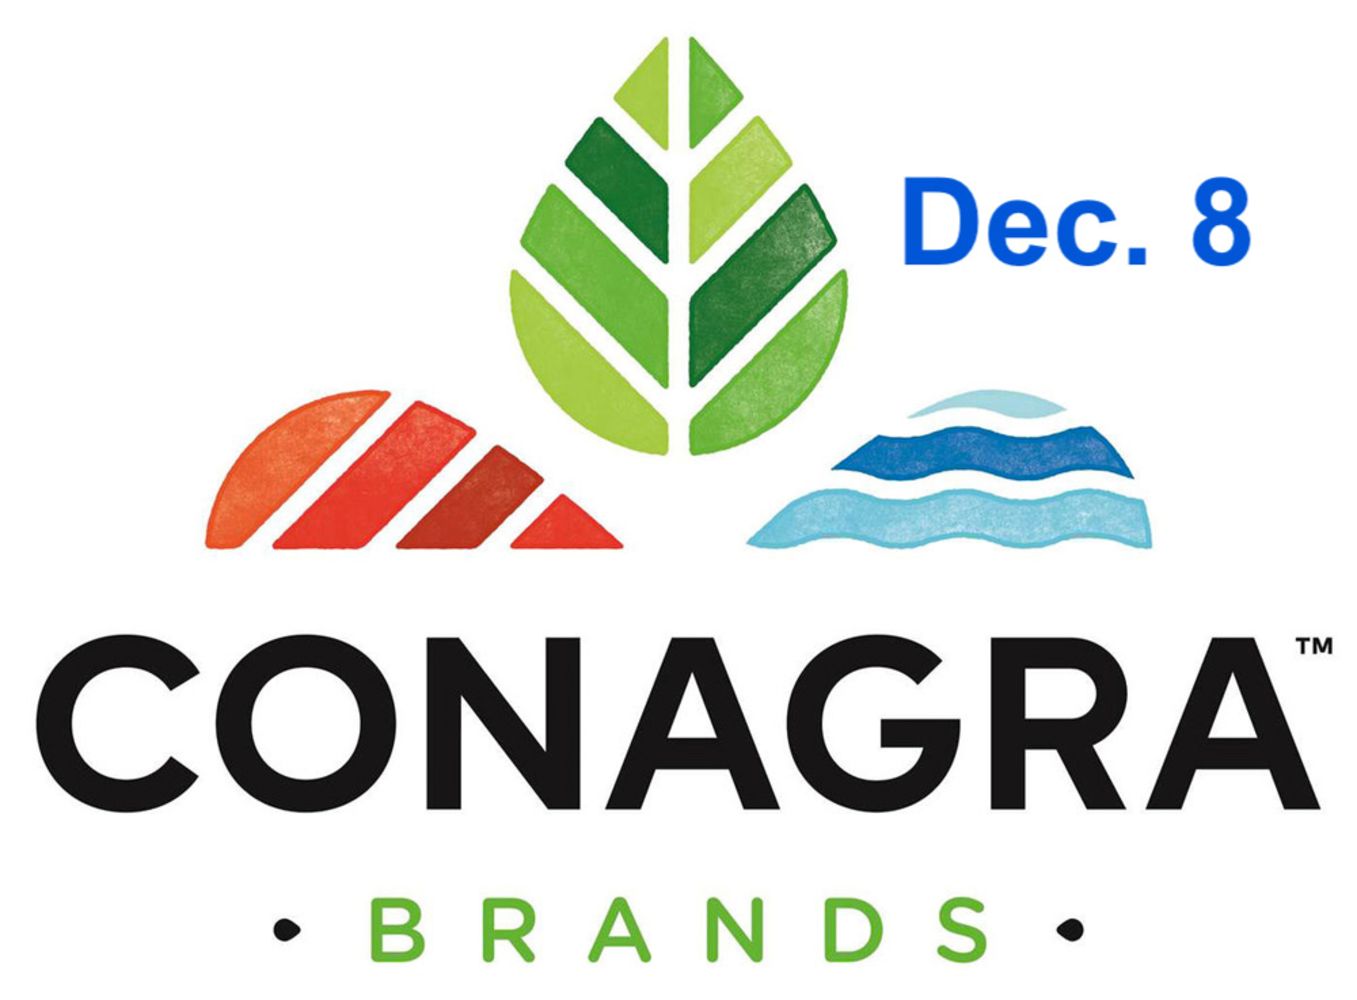 Production equipment surplus to Conagra Brands plant closure - Newport, TN - additional items from Torrence, CA